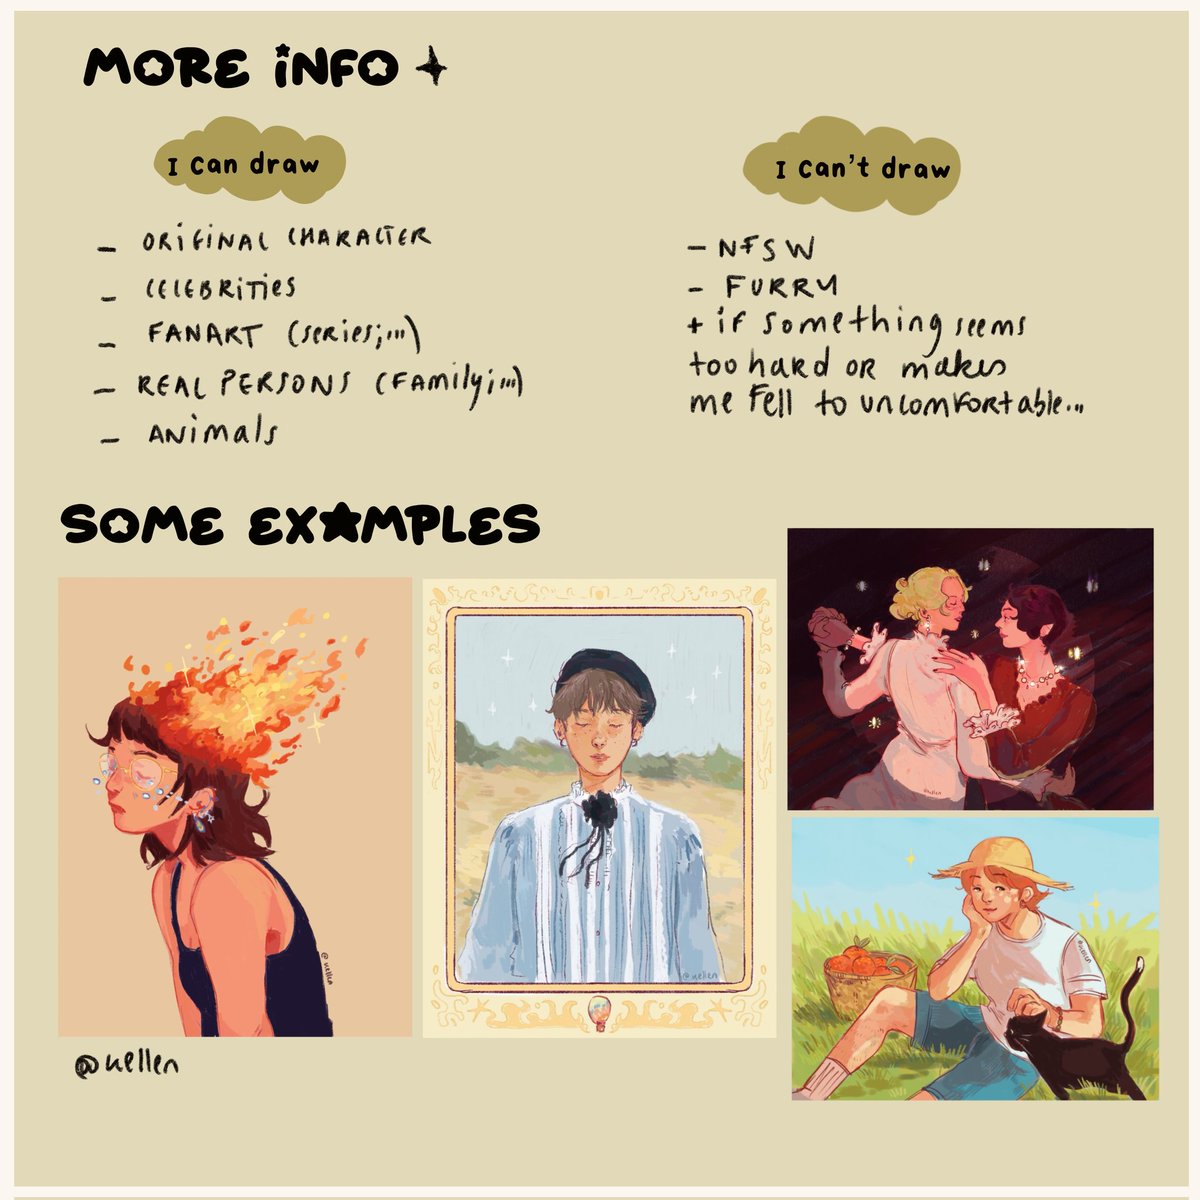 [Rt appreciated] New commissi0ns sheet !! ✨️ DM me if you have any questions!